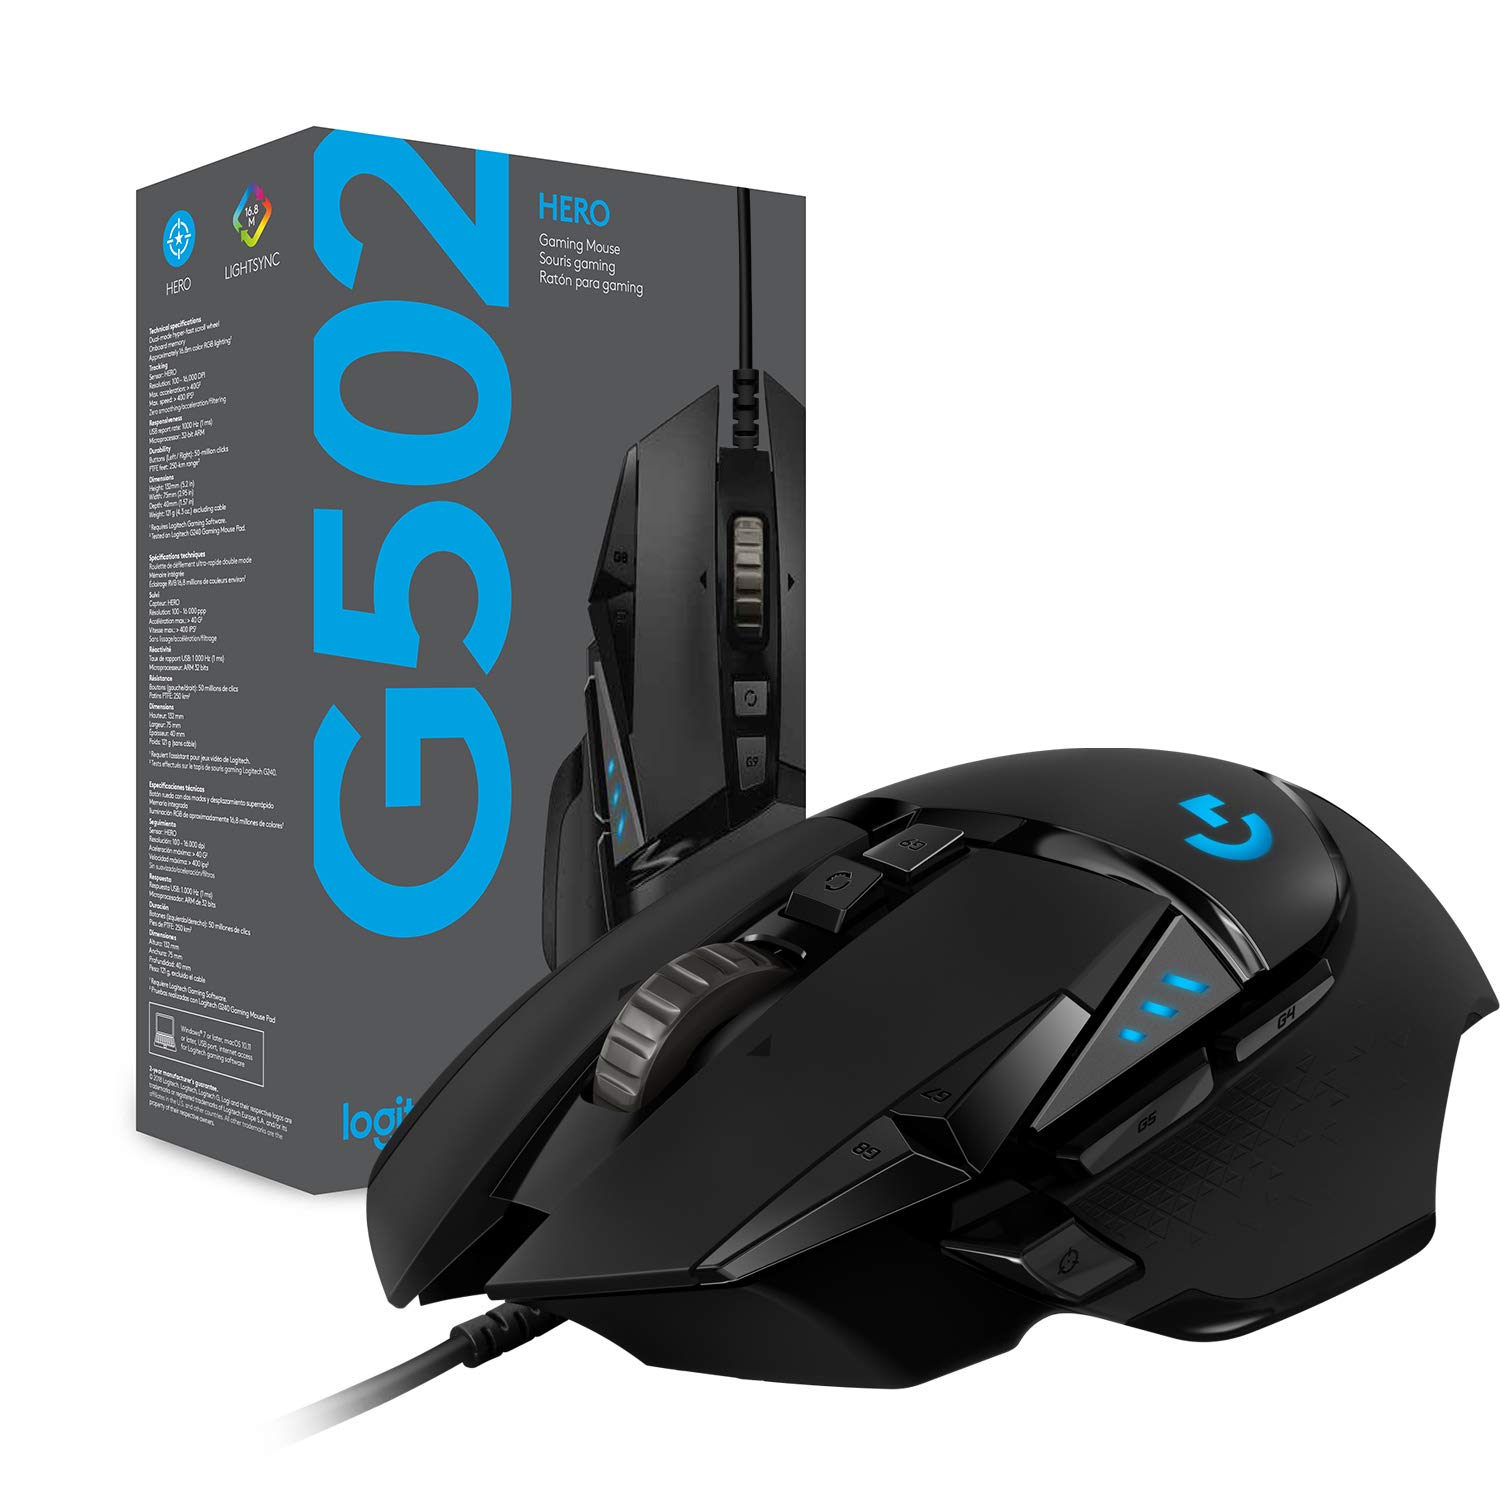 Logitech G502 HERO High Performance Wired Gaming Mouse, HERO 25K Sensor, 25,600 DPI, RGB, Adjustable Weights, 11 Programmable Buttons $35